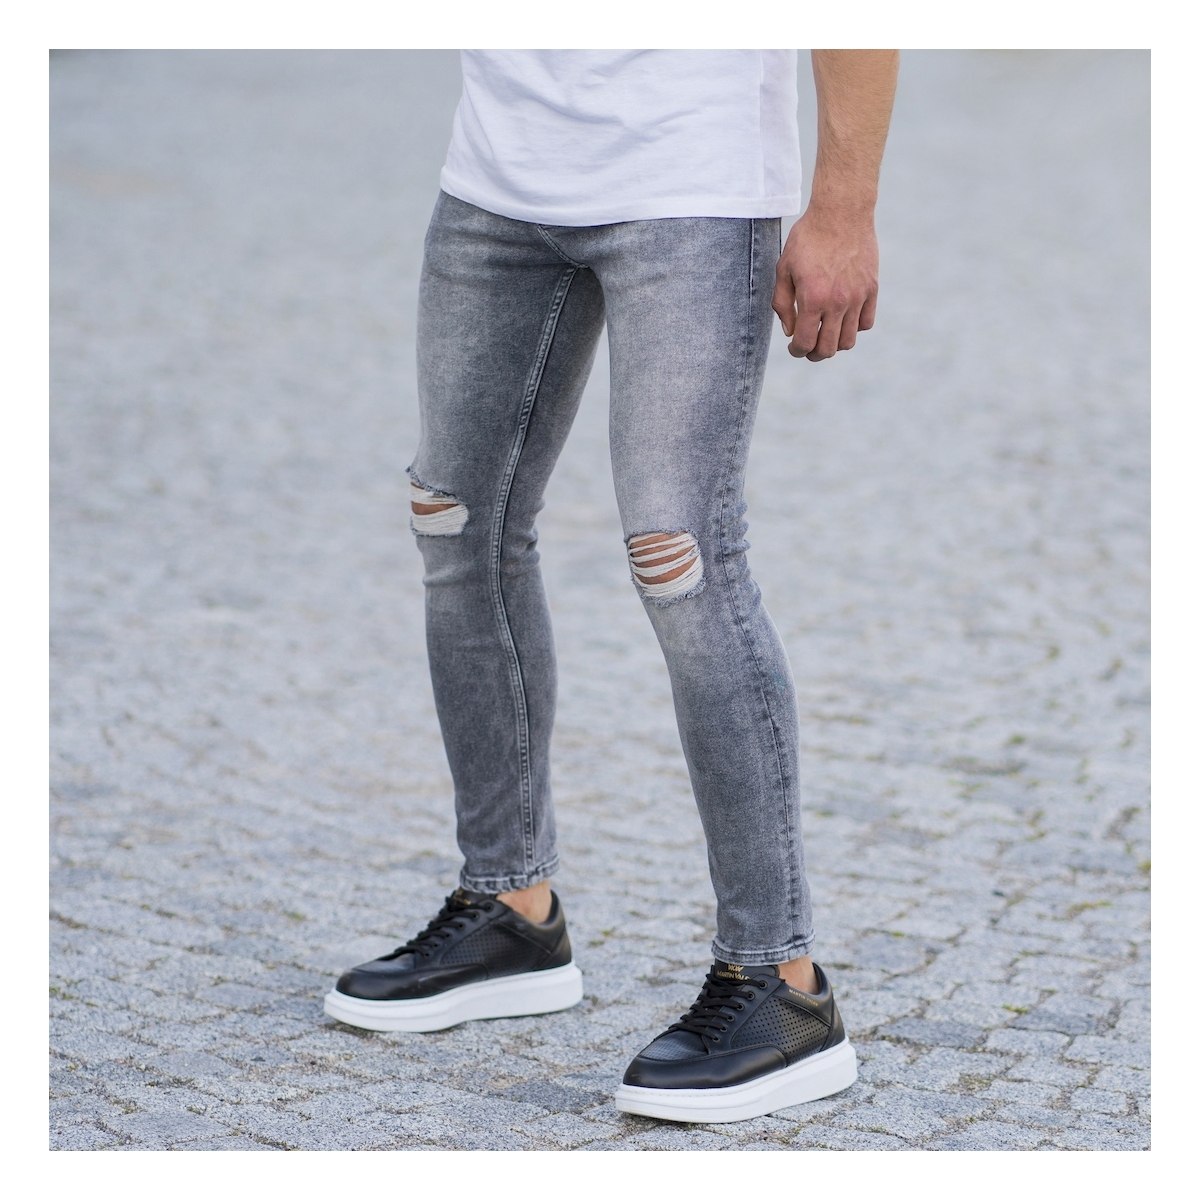 Men's Distorted Leg Skinny Jeans In Anthracite